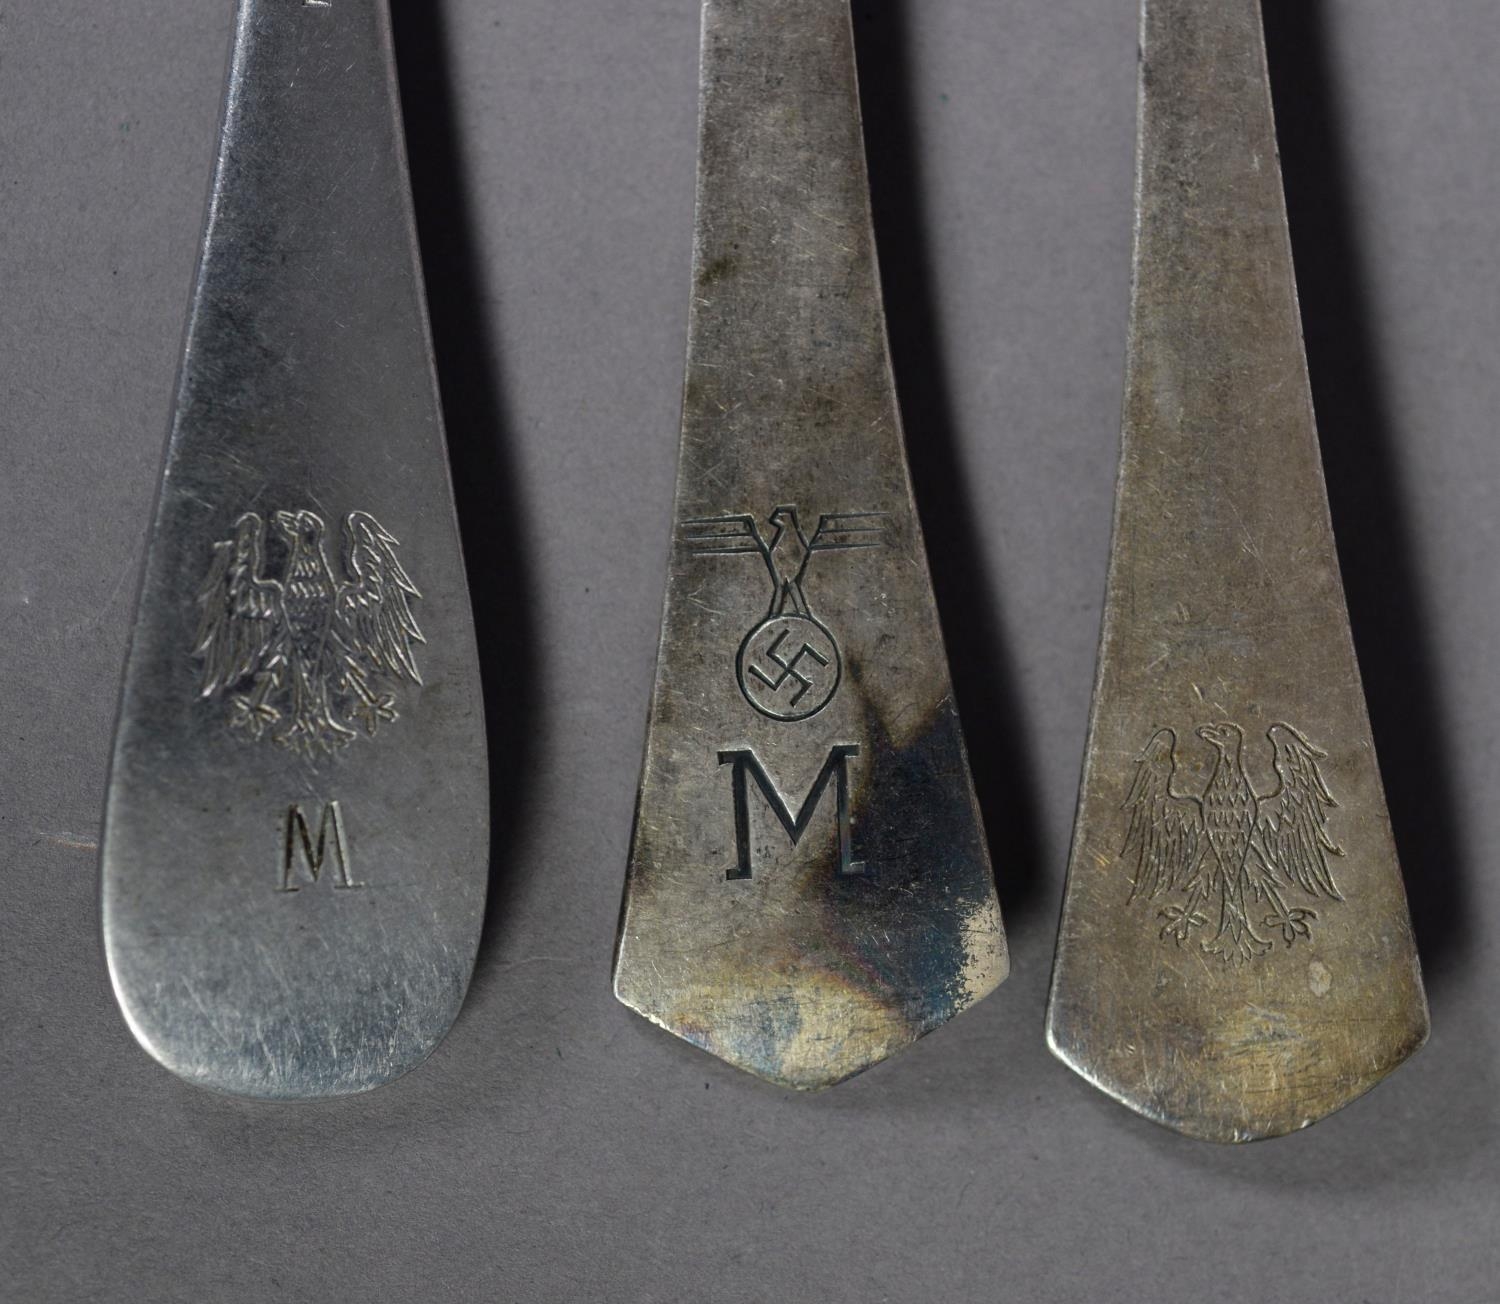 AN INTERESTING COLLECTION OF THIRD REICH ASSOCIATED TABLE FLATWARE: to include three forks and one - Image 2 of 2